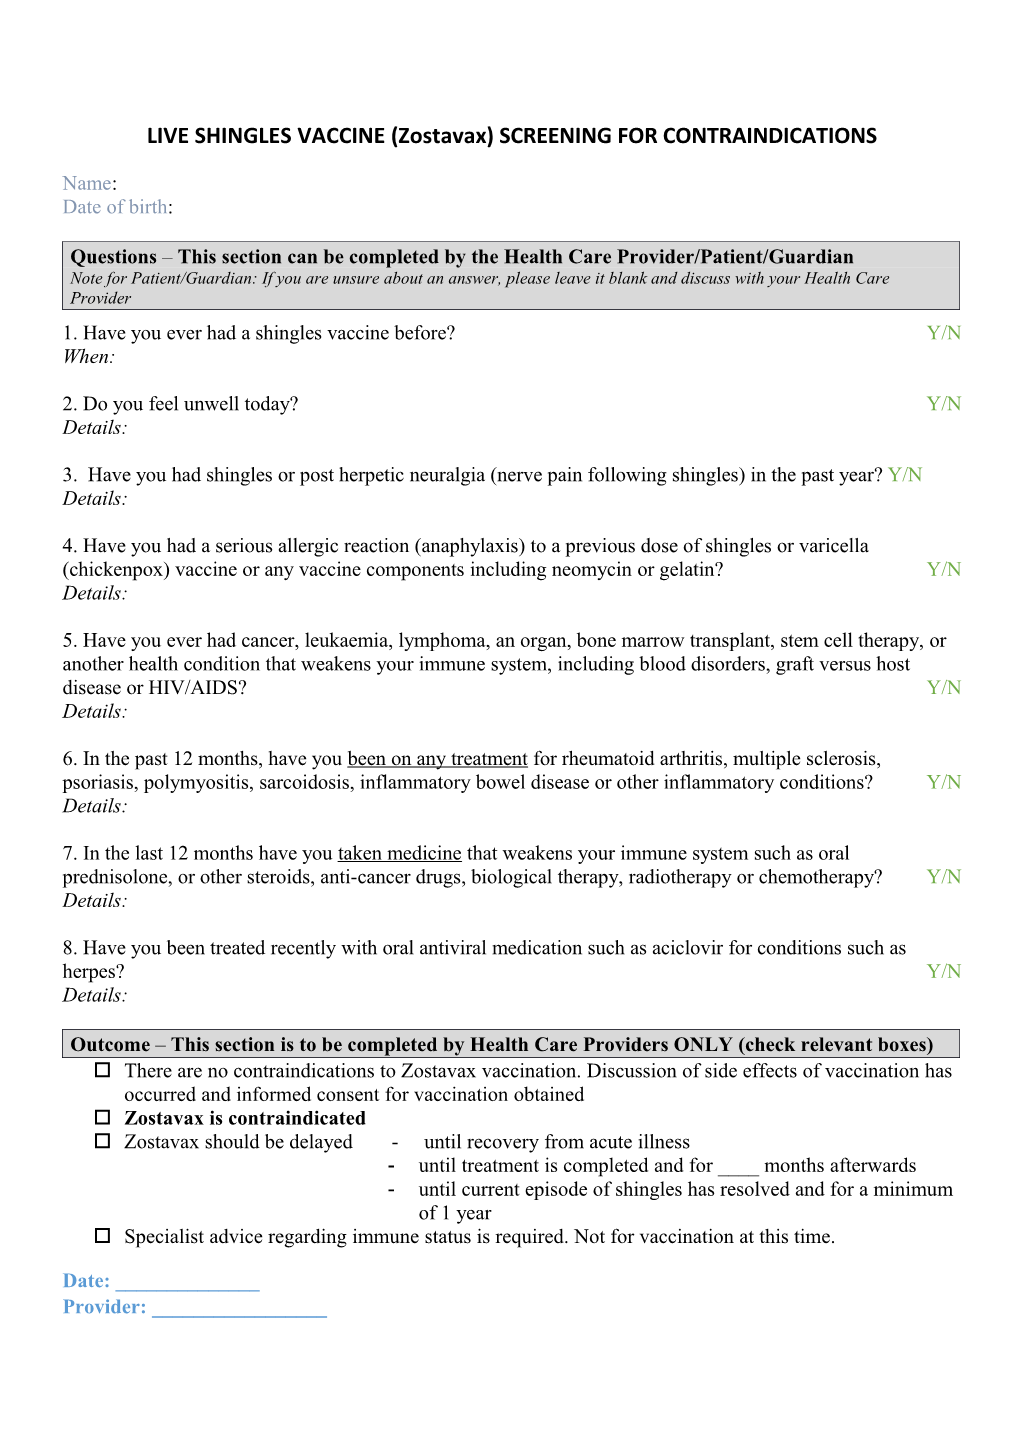 Questions This Section Can Be Completed by the Health Care Provider/Patient/Guardian